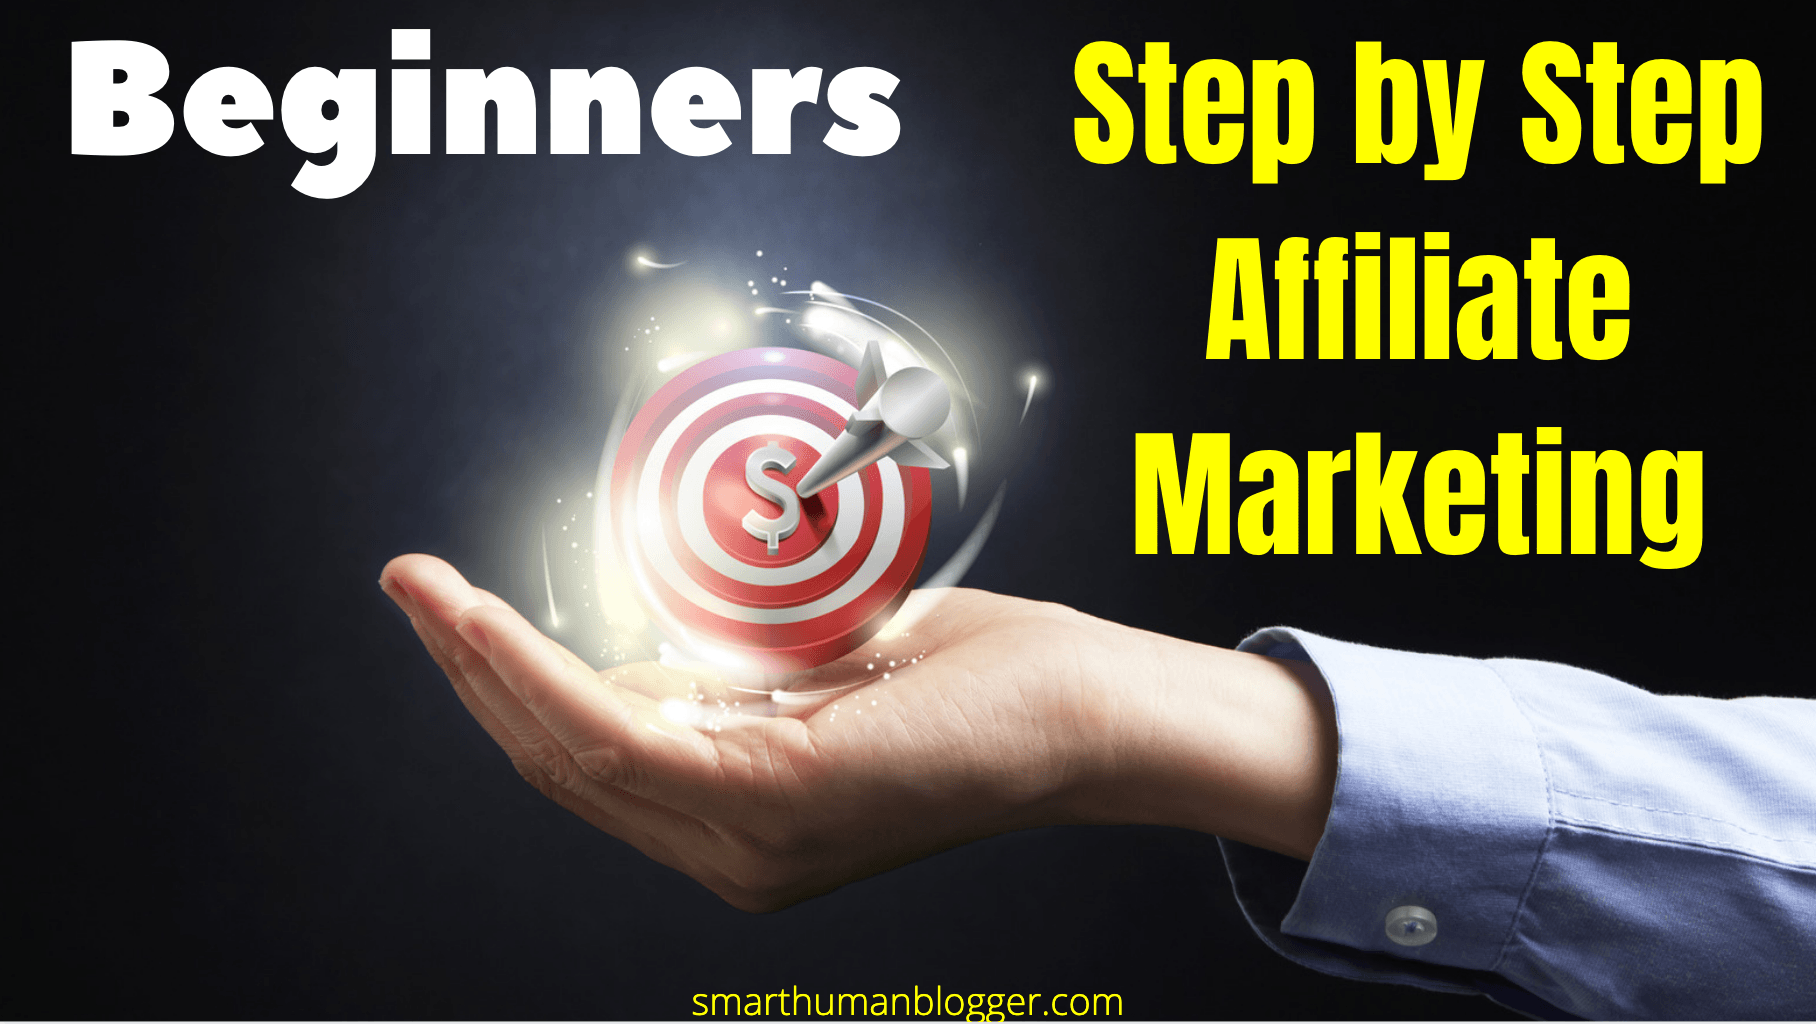 Step by Step Affiliate Marketing for Beginners